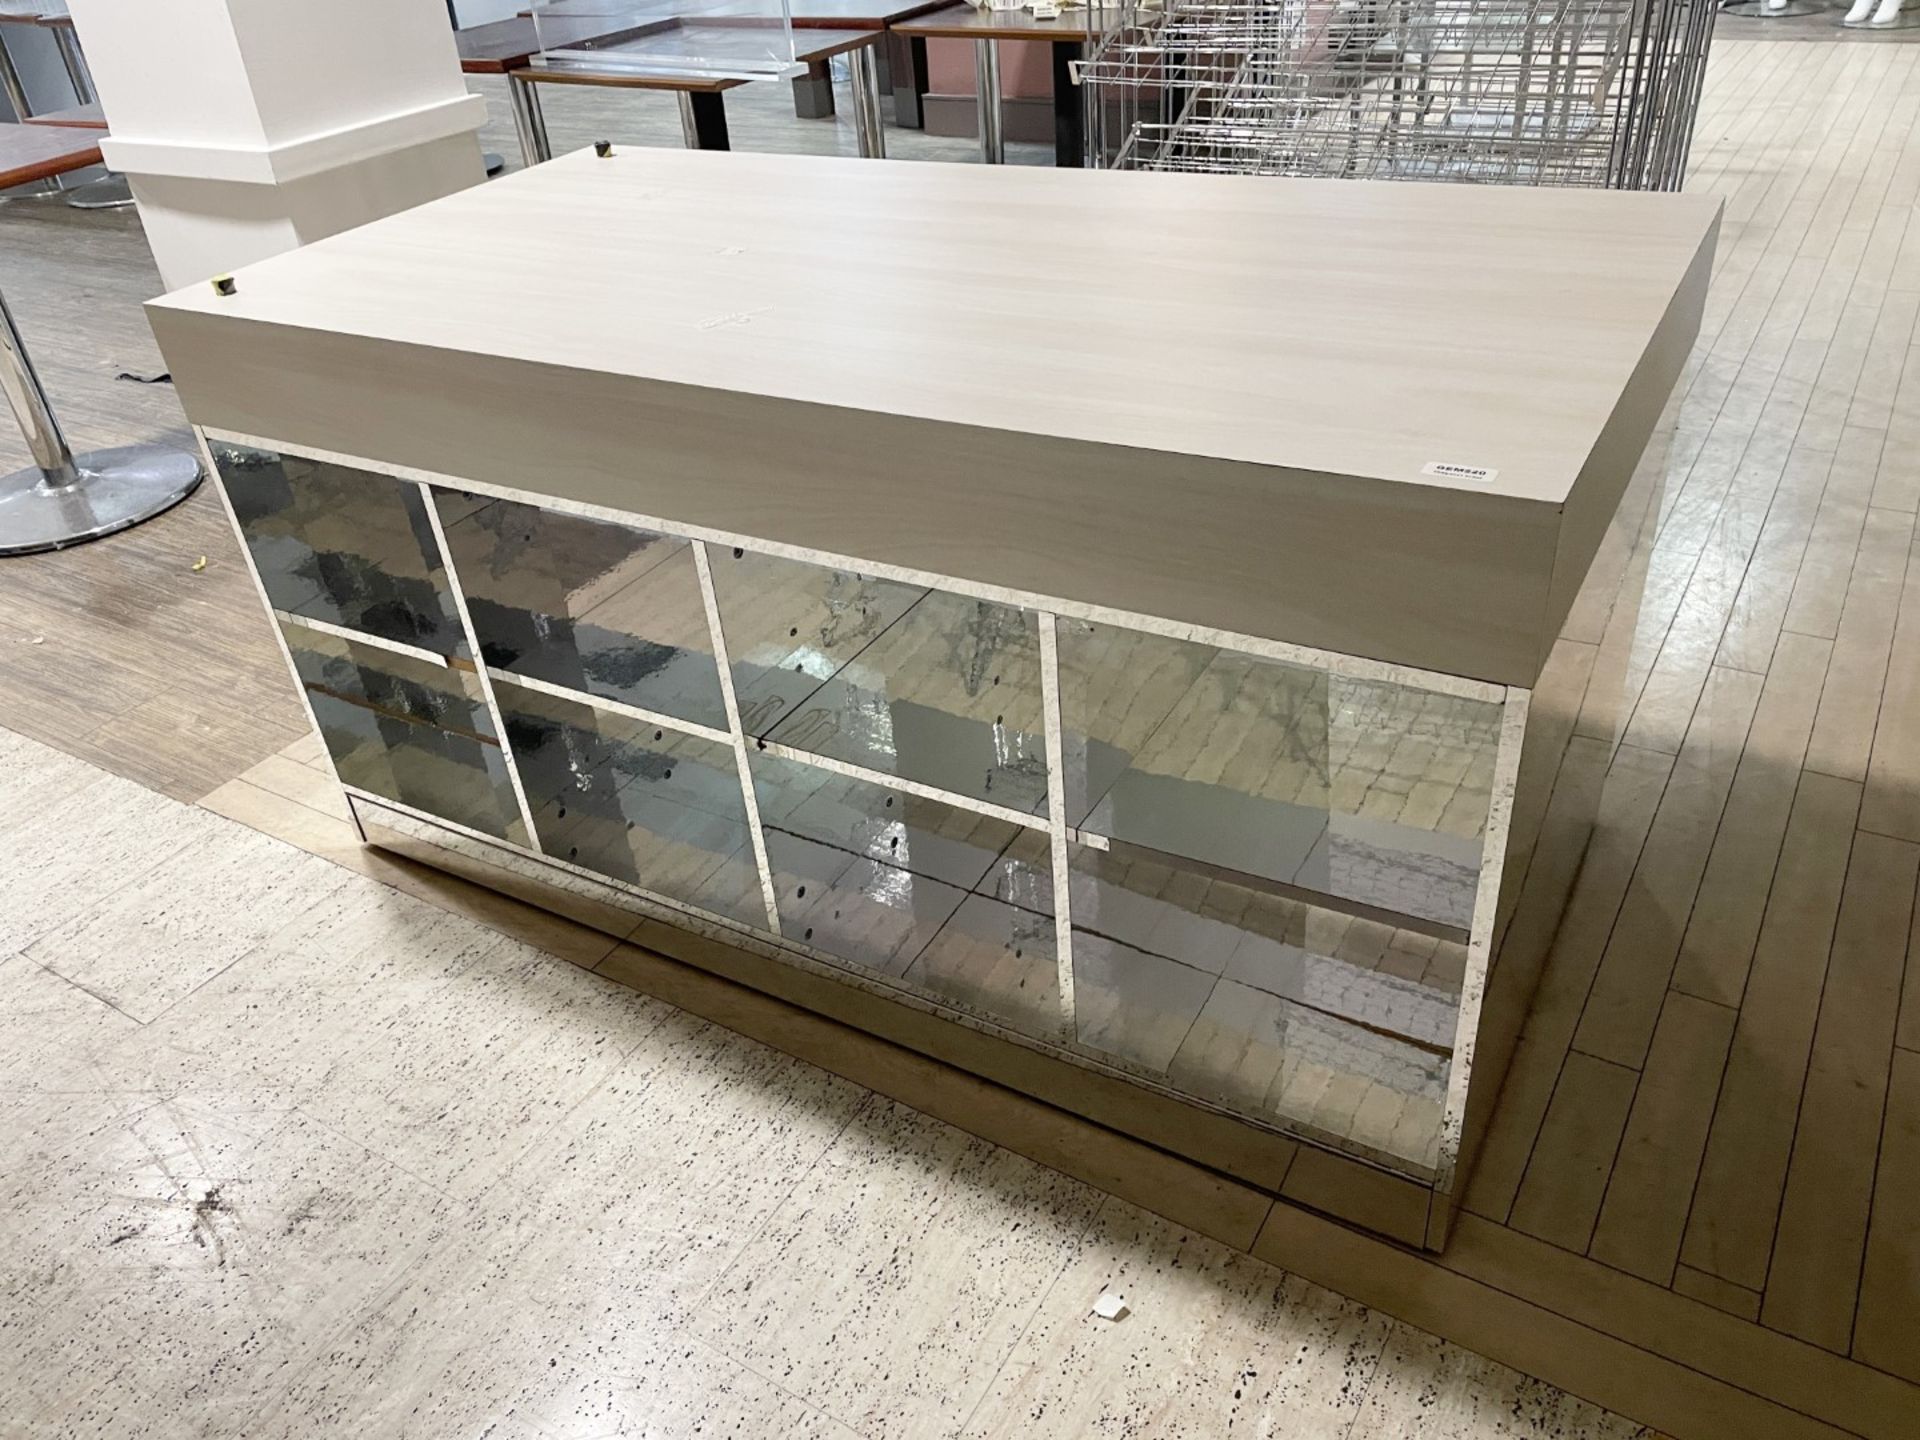 1 x Retail Display Island With Ash Wooden Top and Mirrored Side Shelves and Panels - Size 82 x